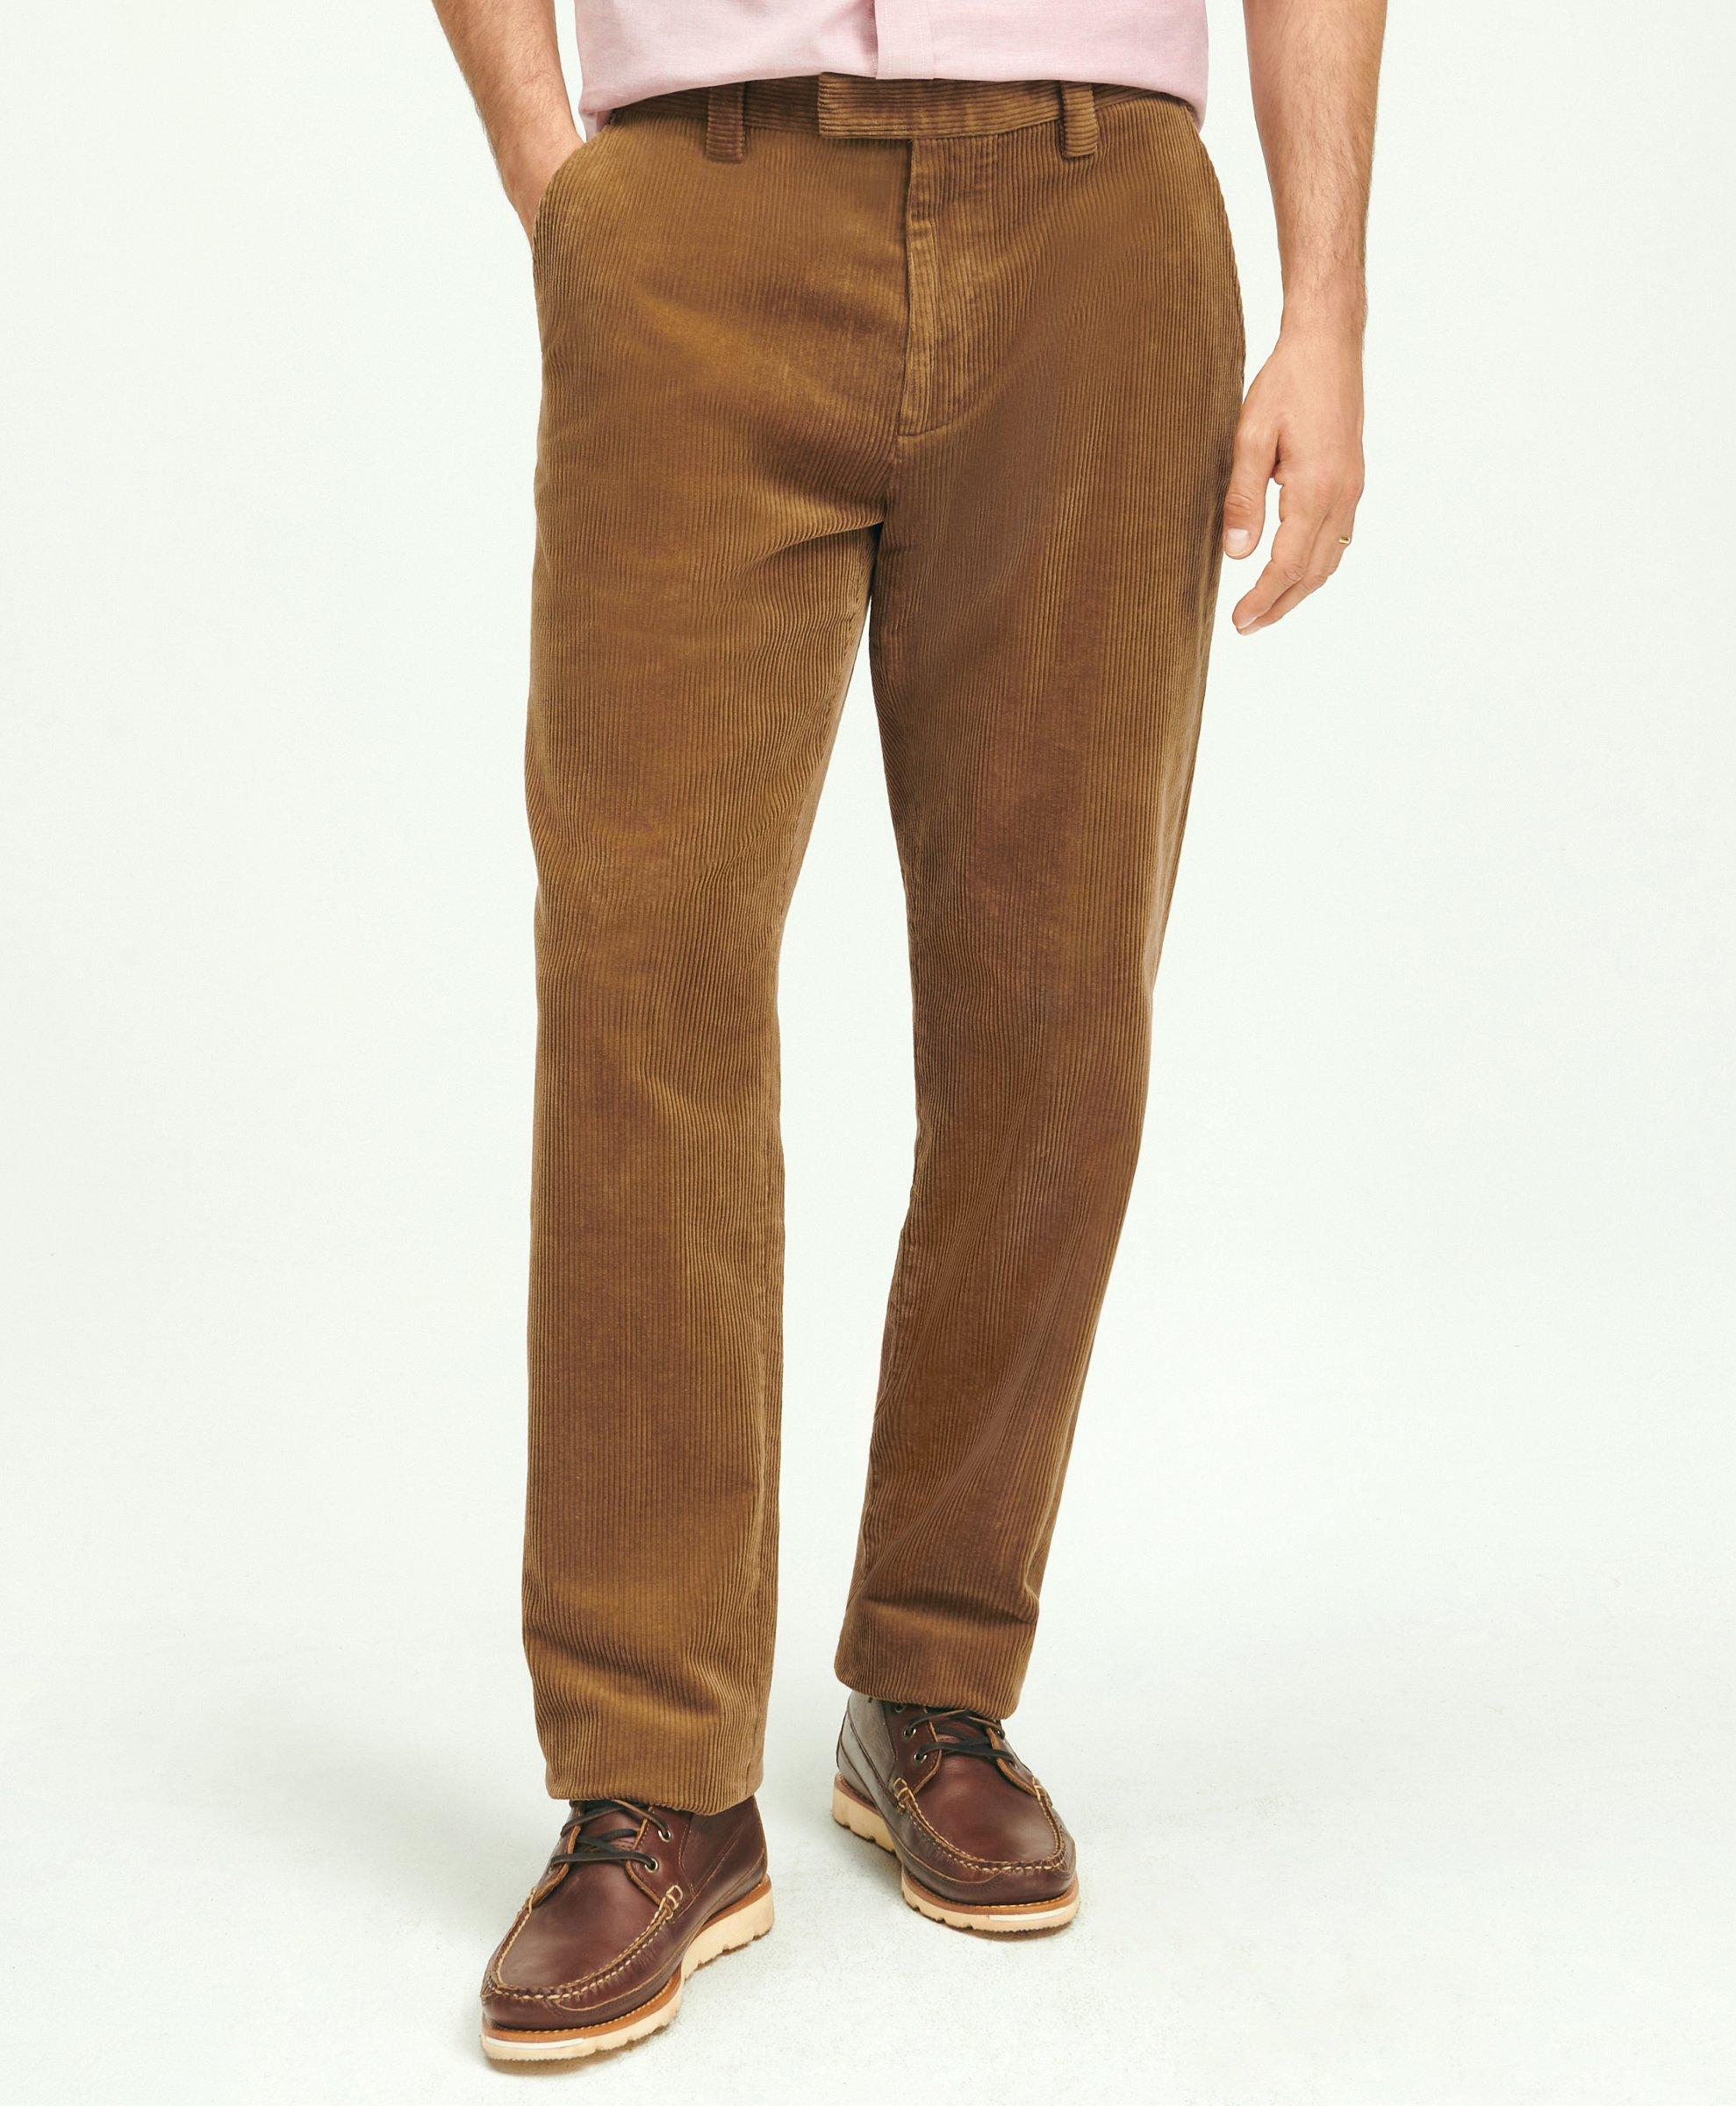 Casual Corduroy Men Pants ⎮ SWS Clothing and Accessories